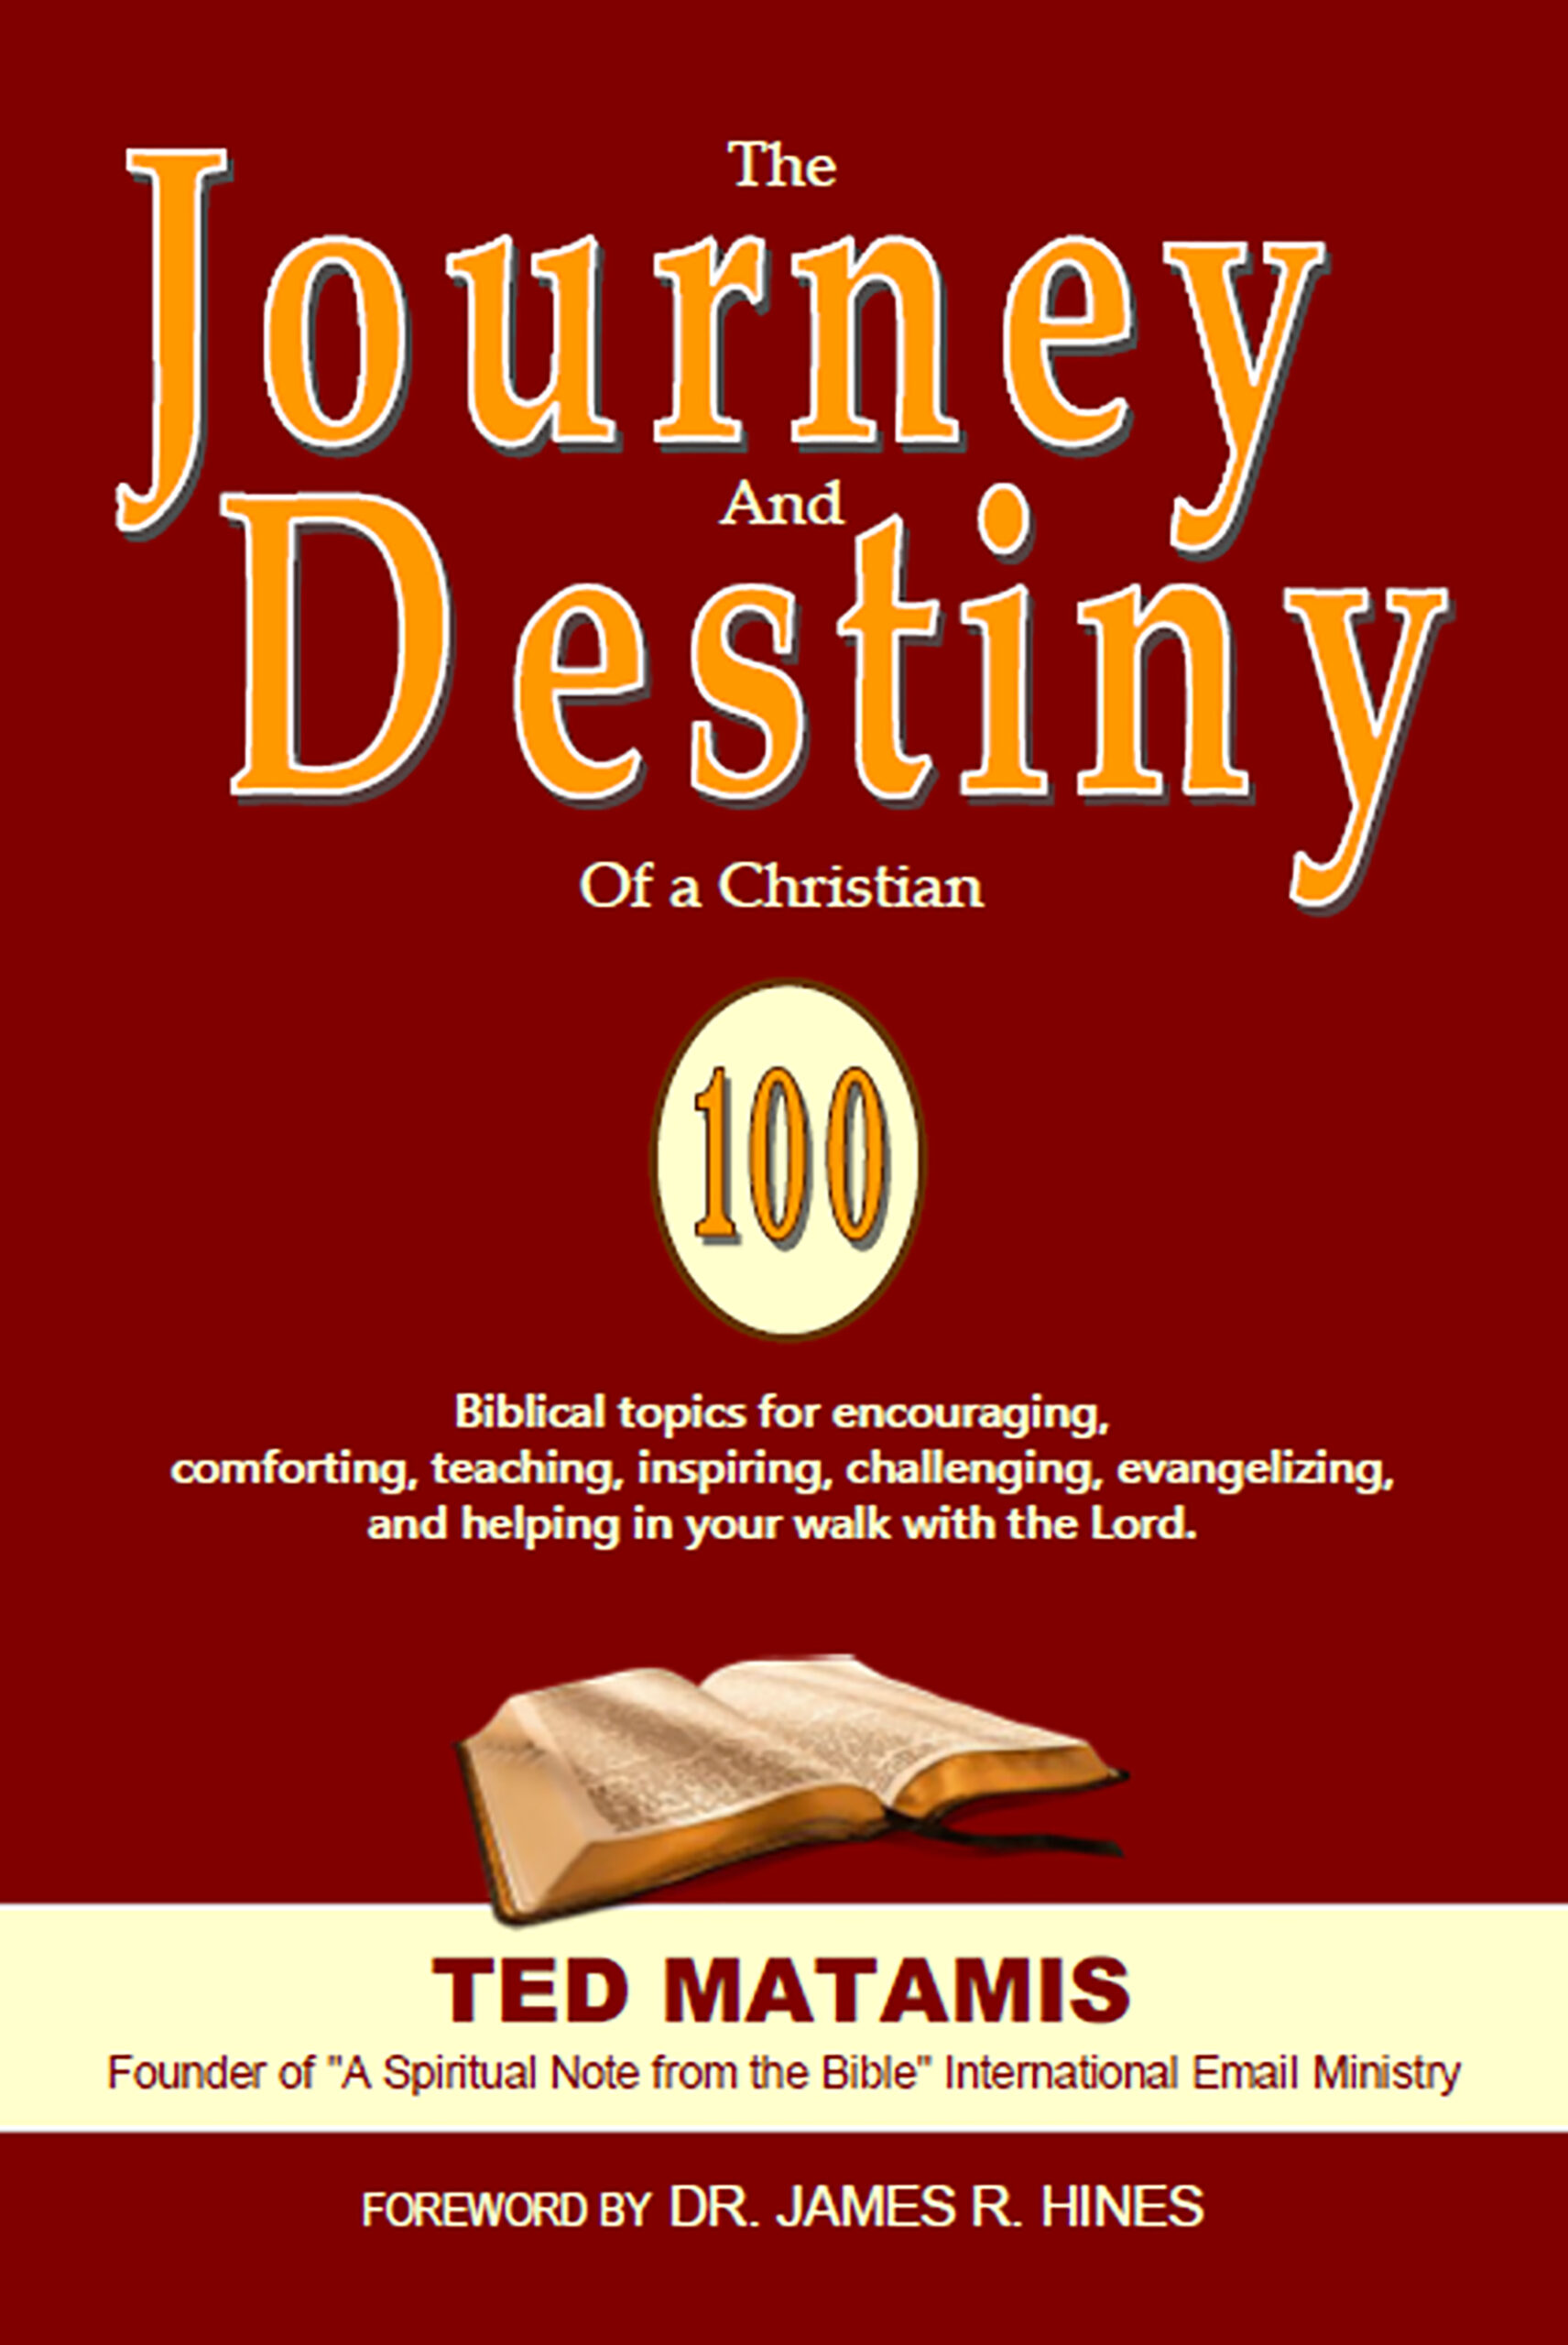 The JOURNEY and DESTINY of a Christian by Ted Matamis